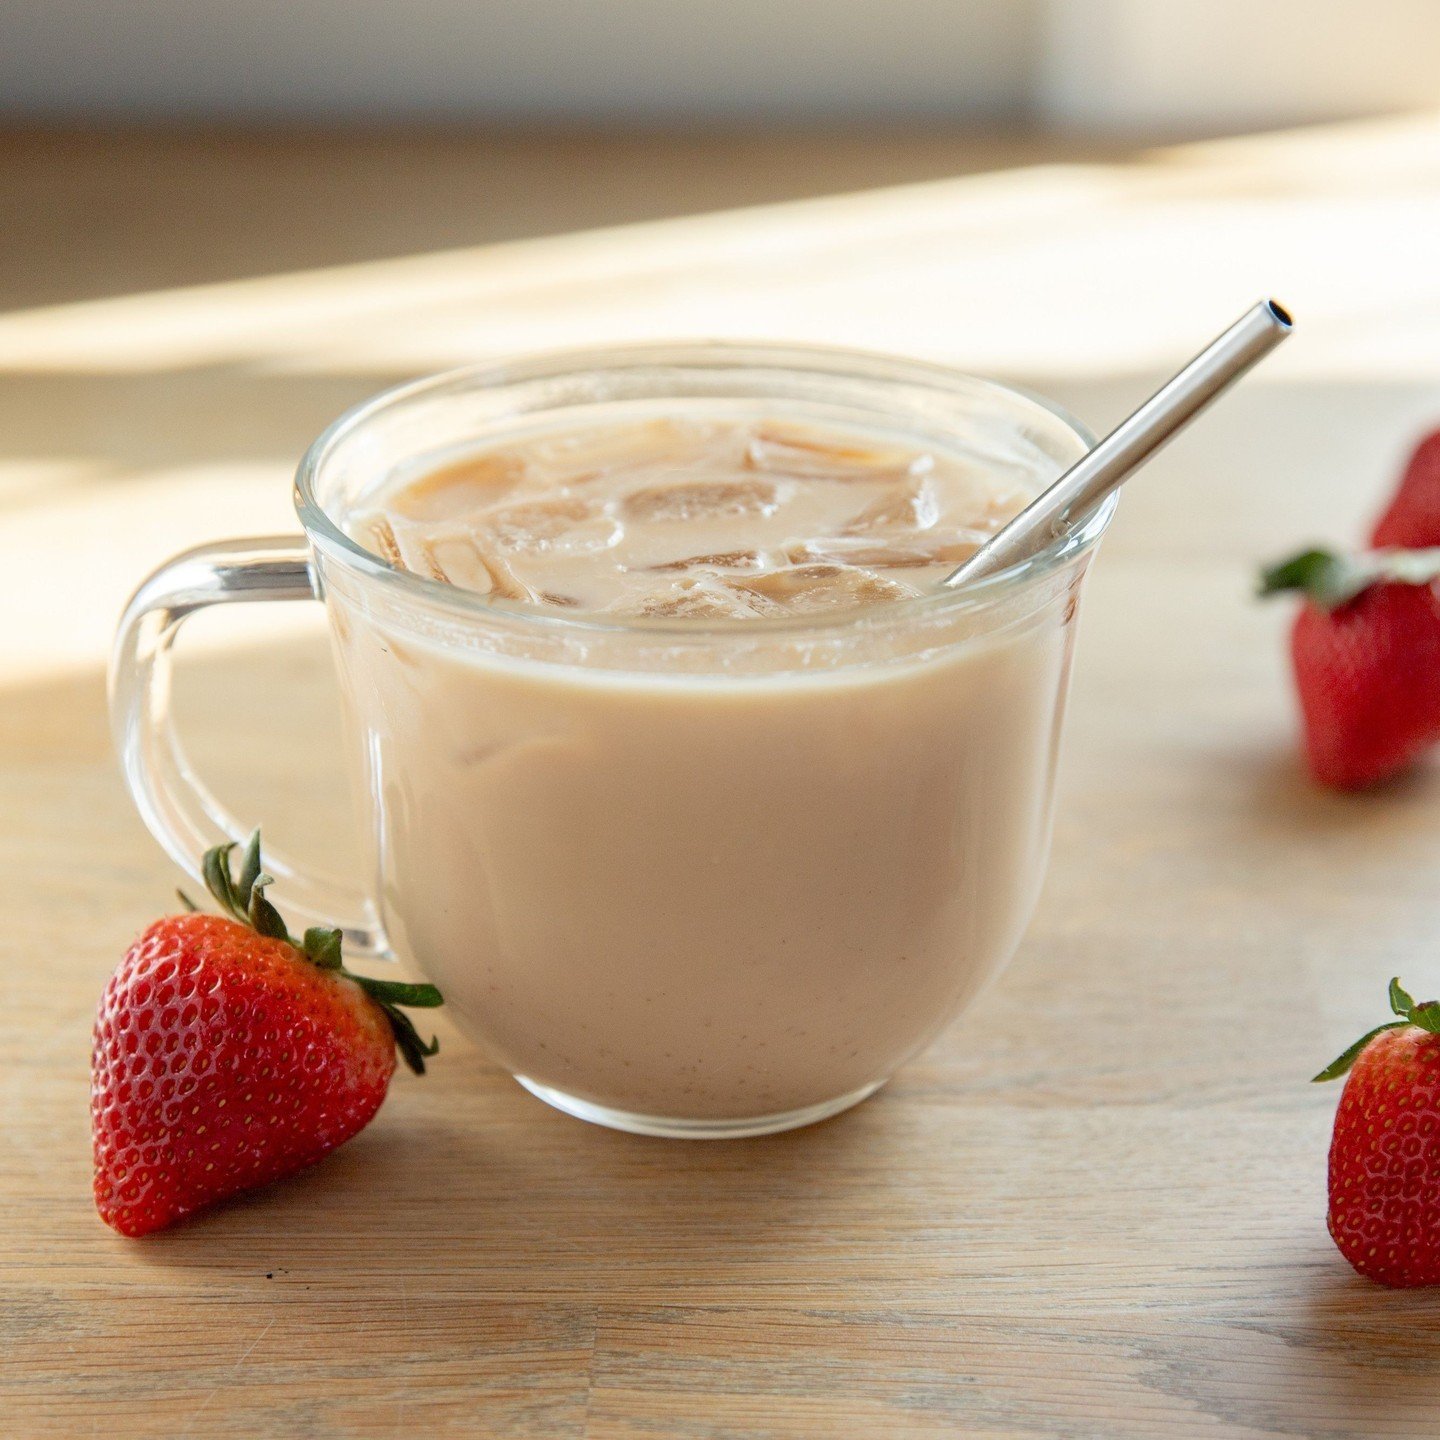 We're celebrating the season with our new Stirring Up Spring Iced Latte! This refreshing beverage is made with lavender syrup, strawberry puree, espresso, and your choice of milk. 🍓 Available while supplies last!